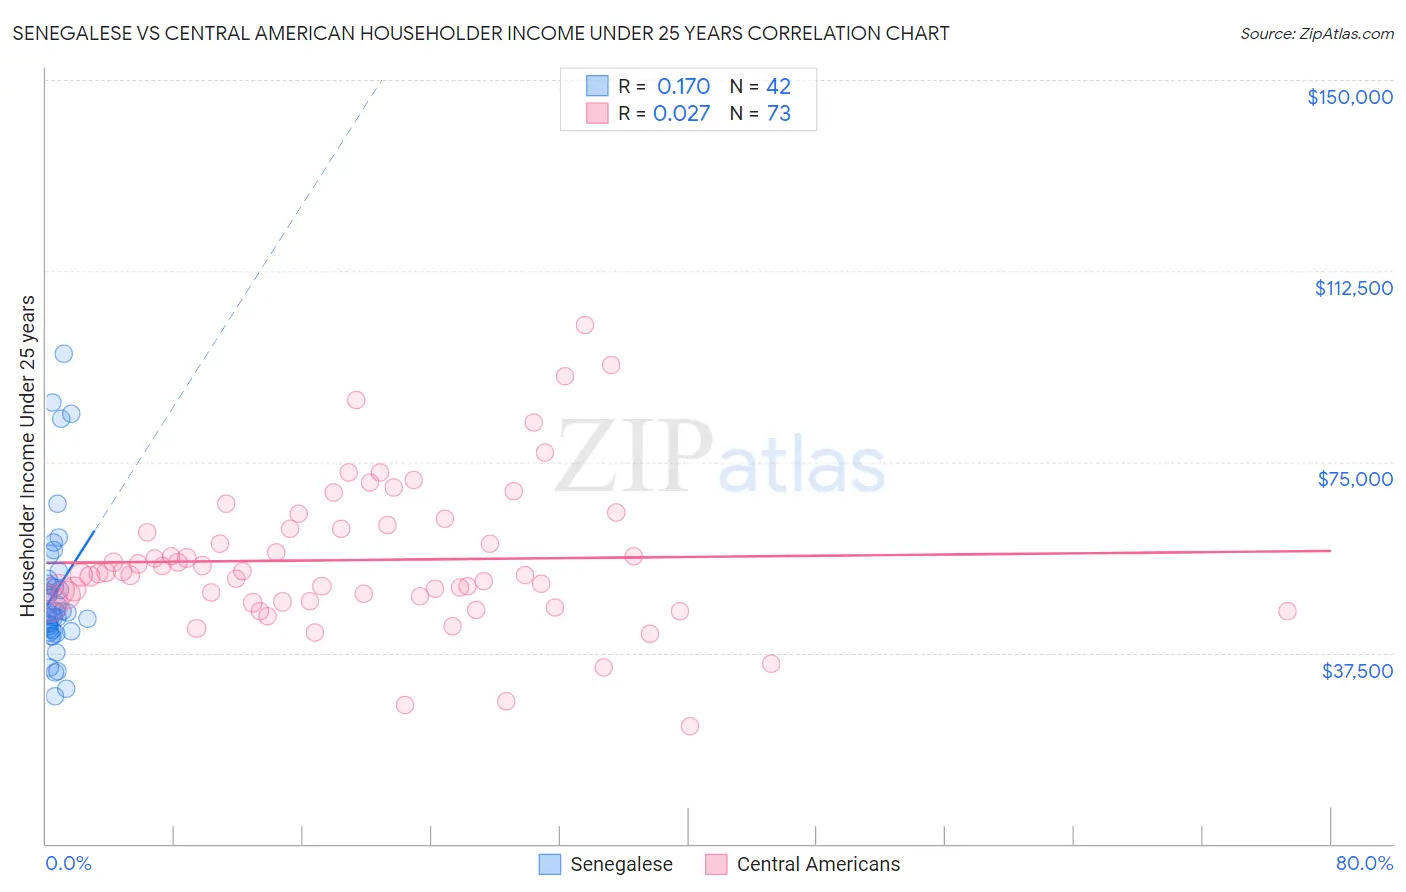 Senegalese vs Central American Householder Income Under 25 years